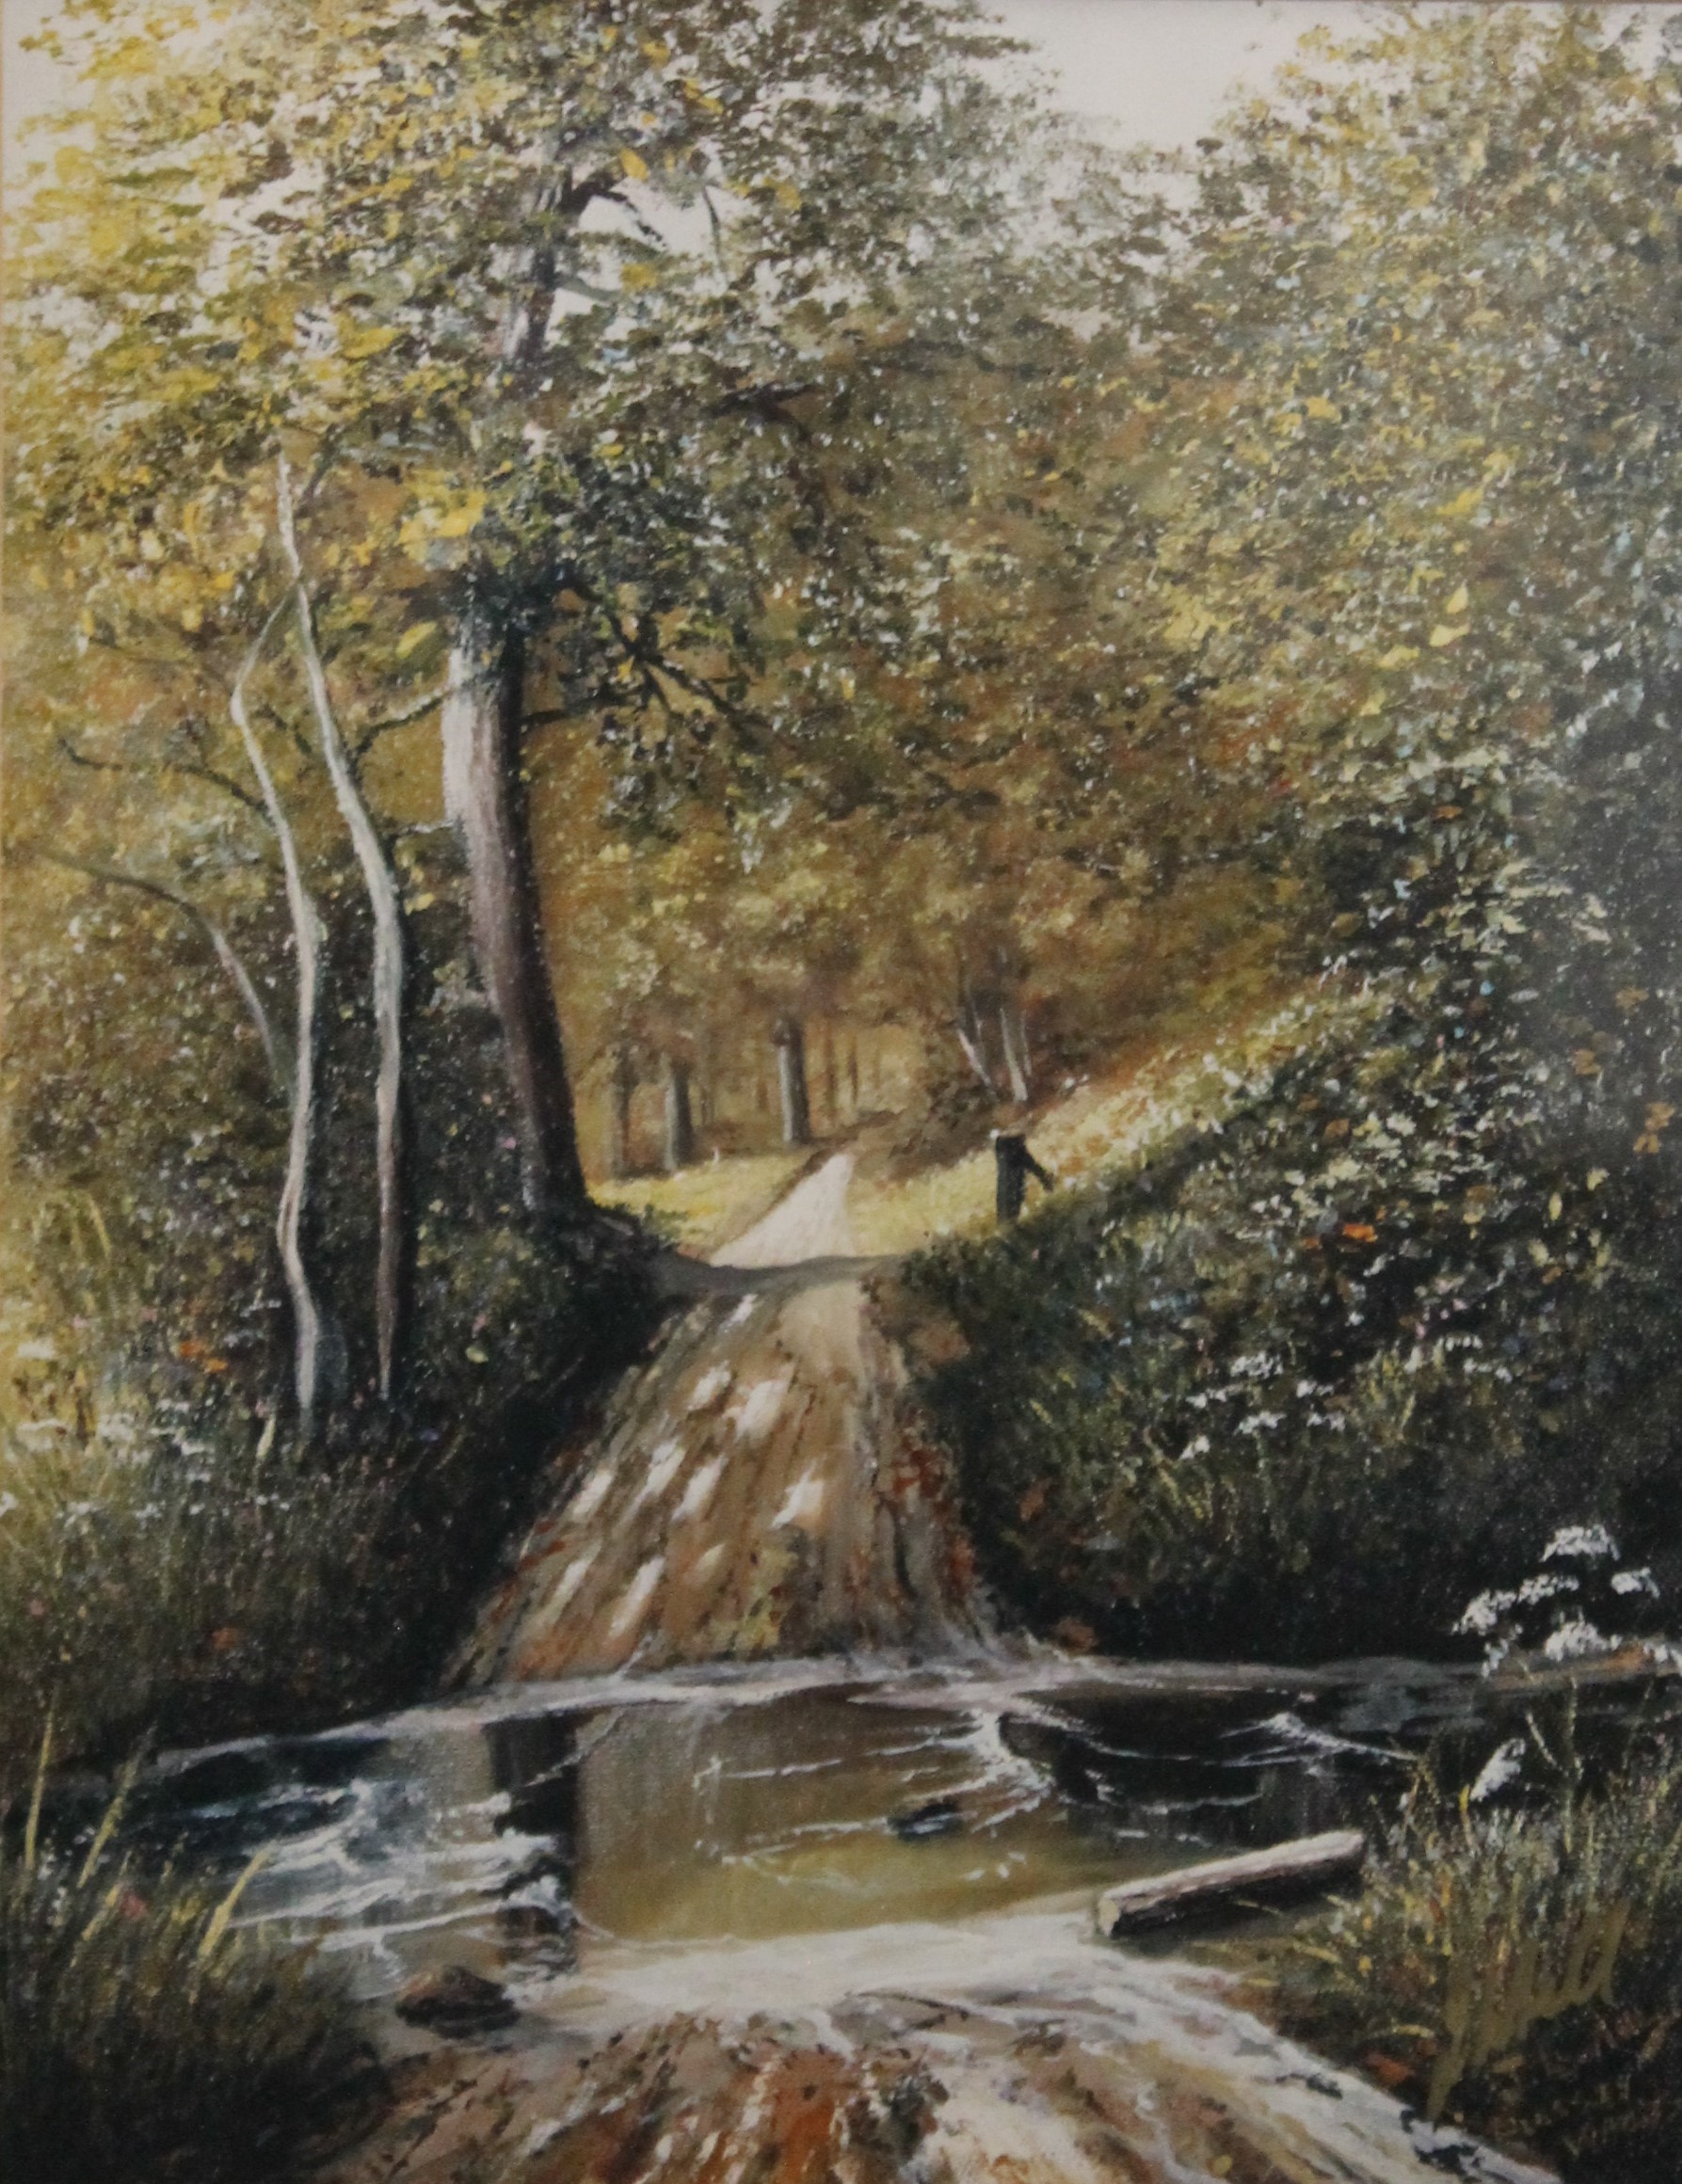 J L AULD, Morning in Plessey Woods, limited edition print, numbered 10/150, framed and glazed. 18.